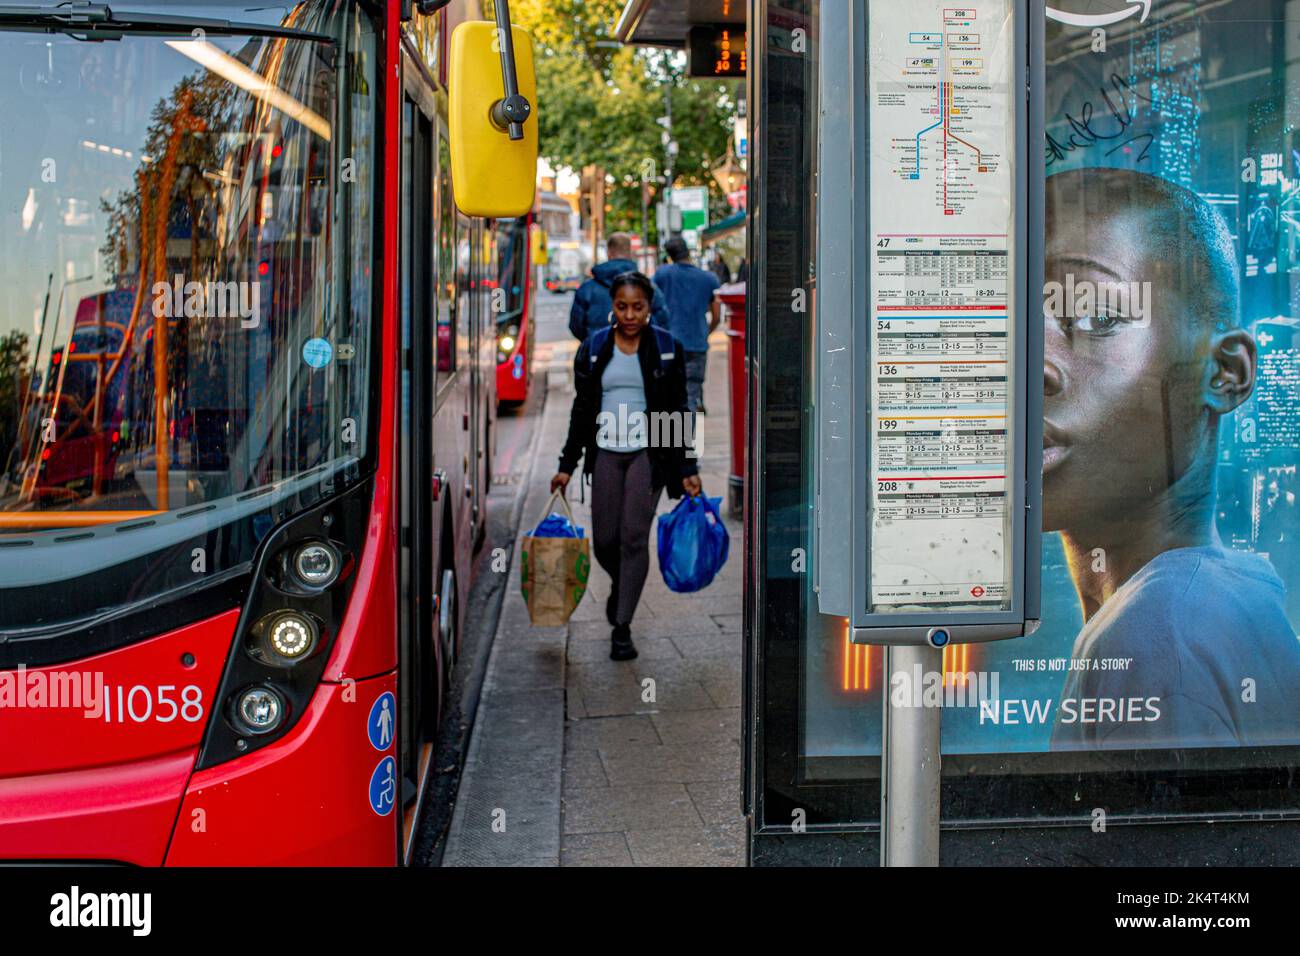 London, UK. Sept 29 2022 .A red double-decker bus  and woman with shopping bags at bus stop in Lewisham. Stock Photo